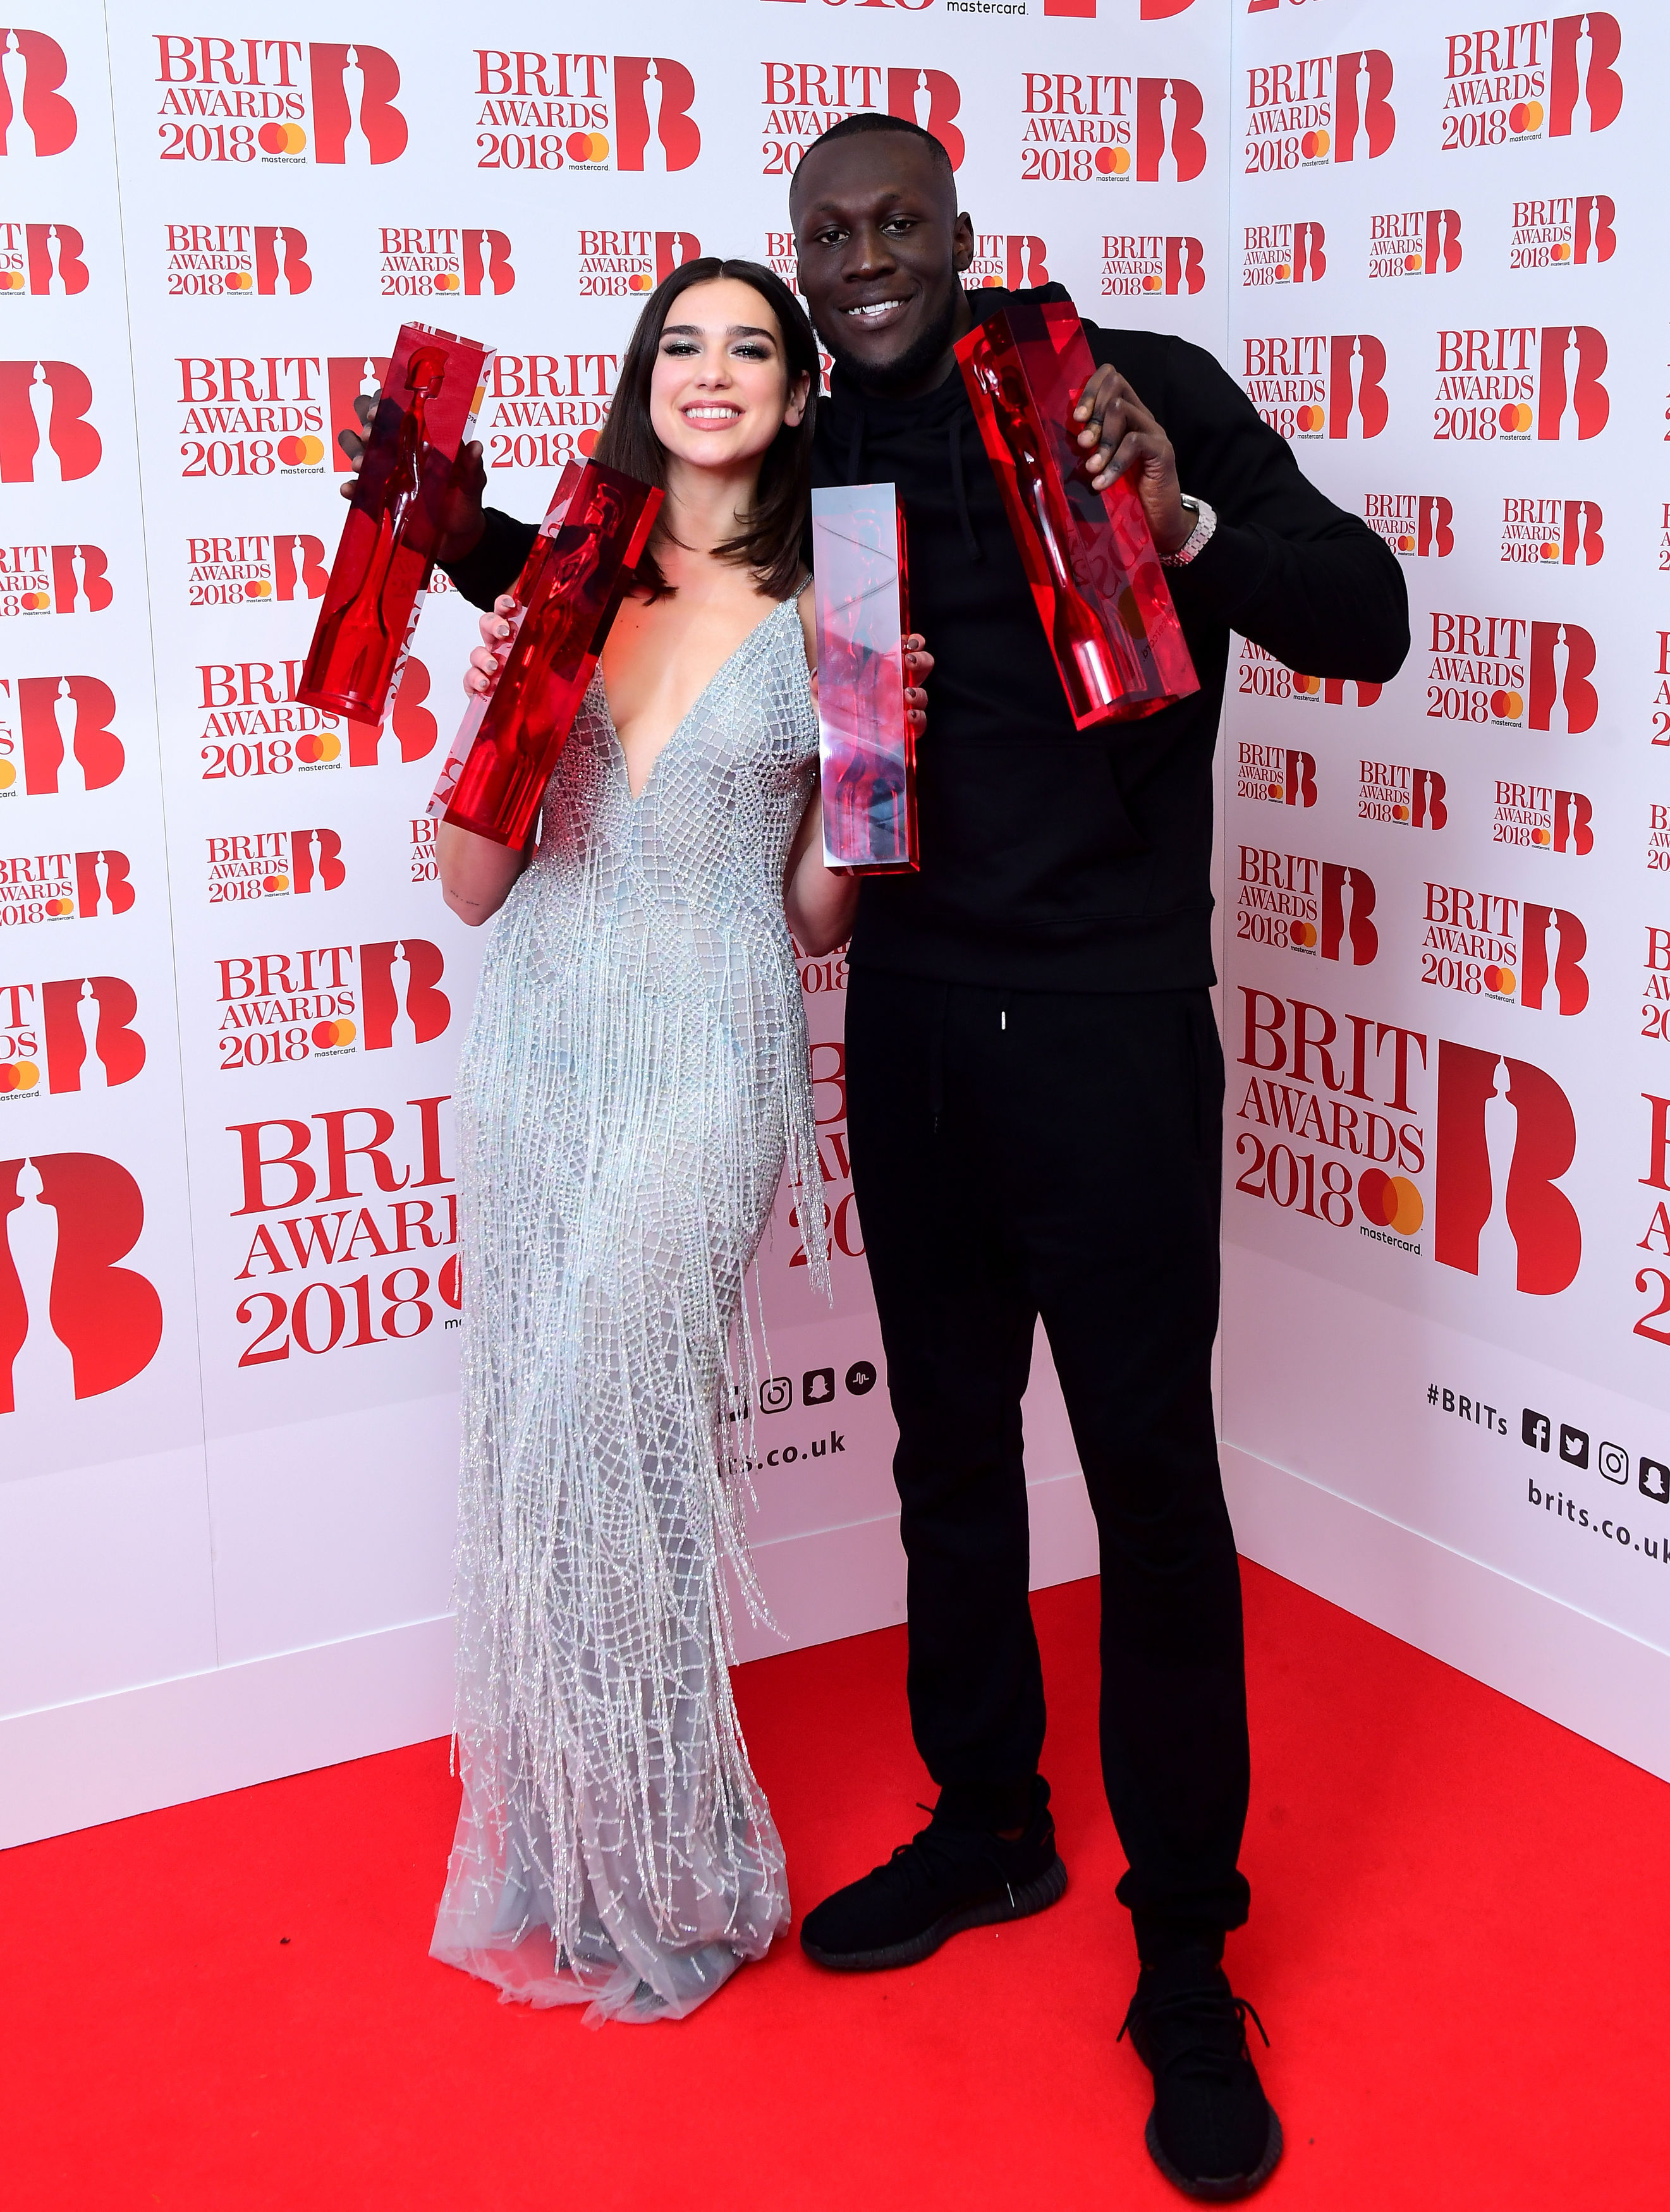 Dua Lipa with her awards for Best British Female Solo Artist and Breakthrough Act, and Stormzy with his British Album of the Year and British Male Solo Artist awards